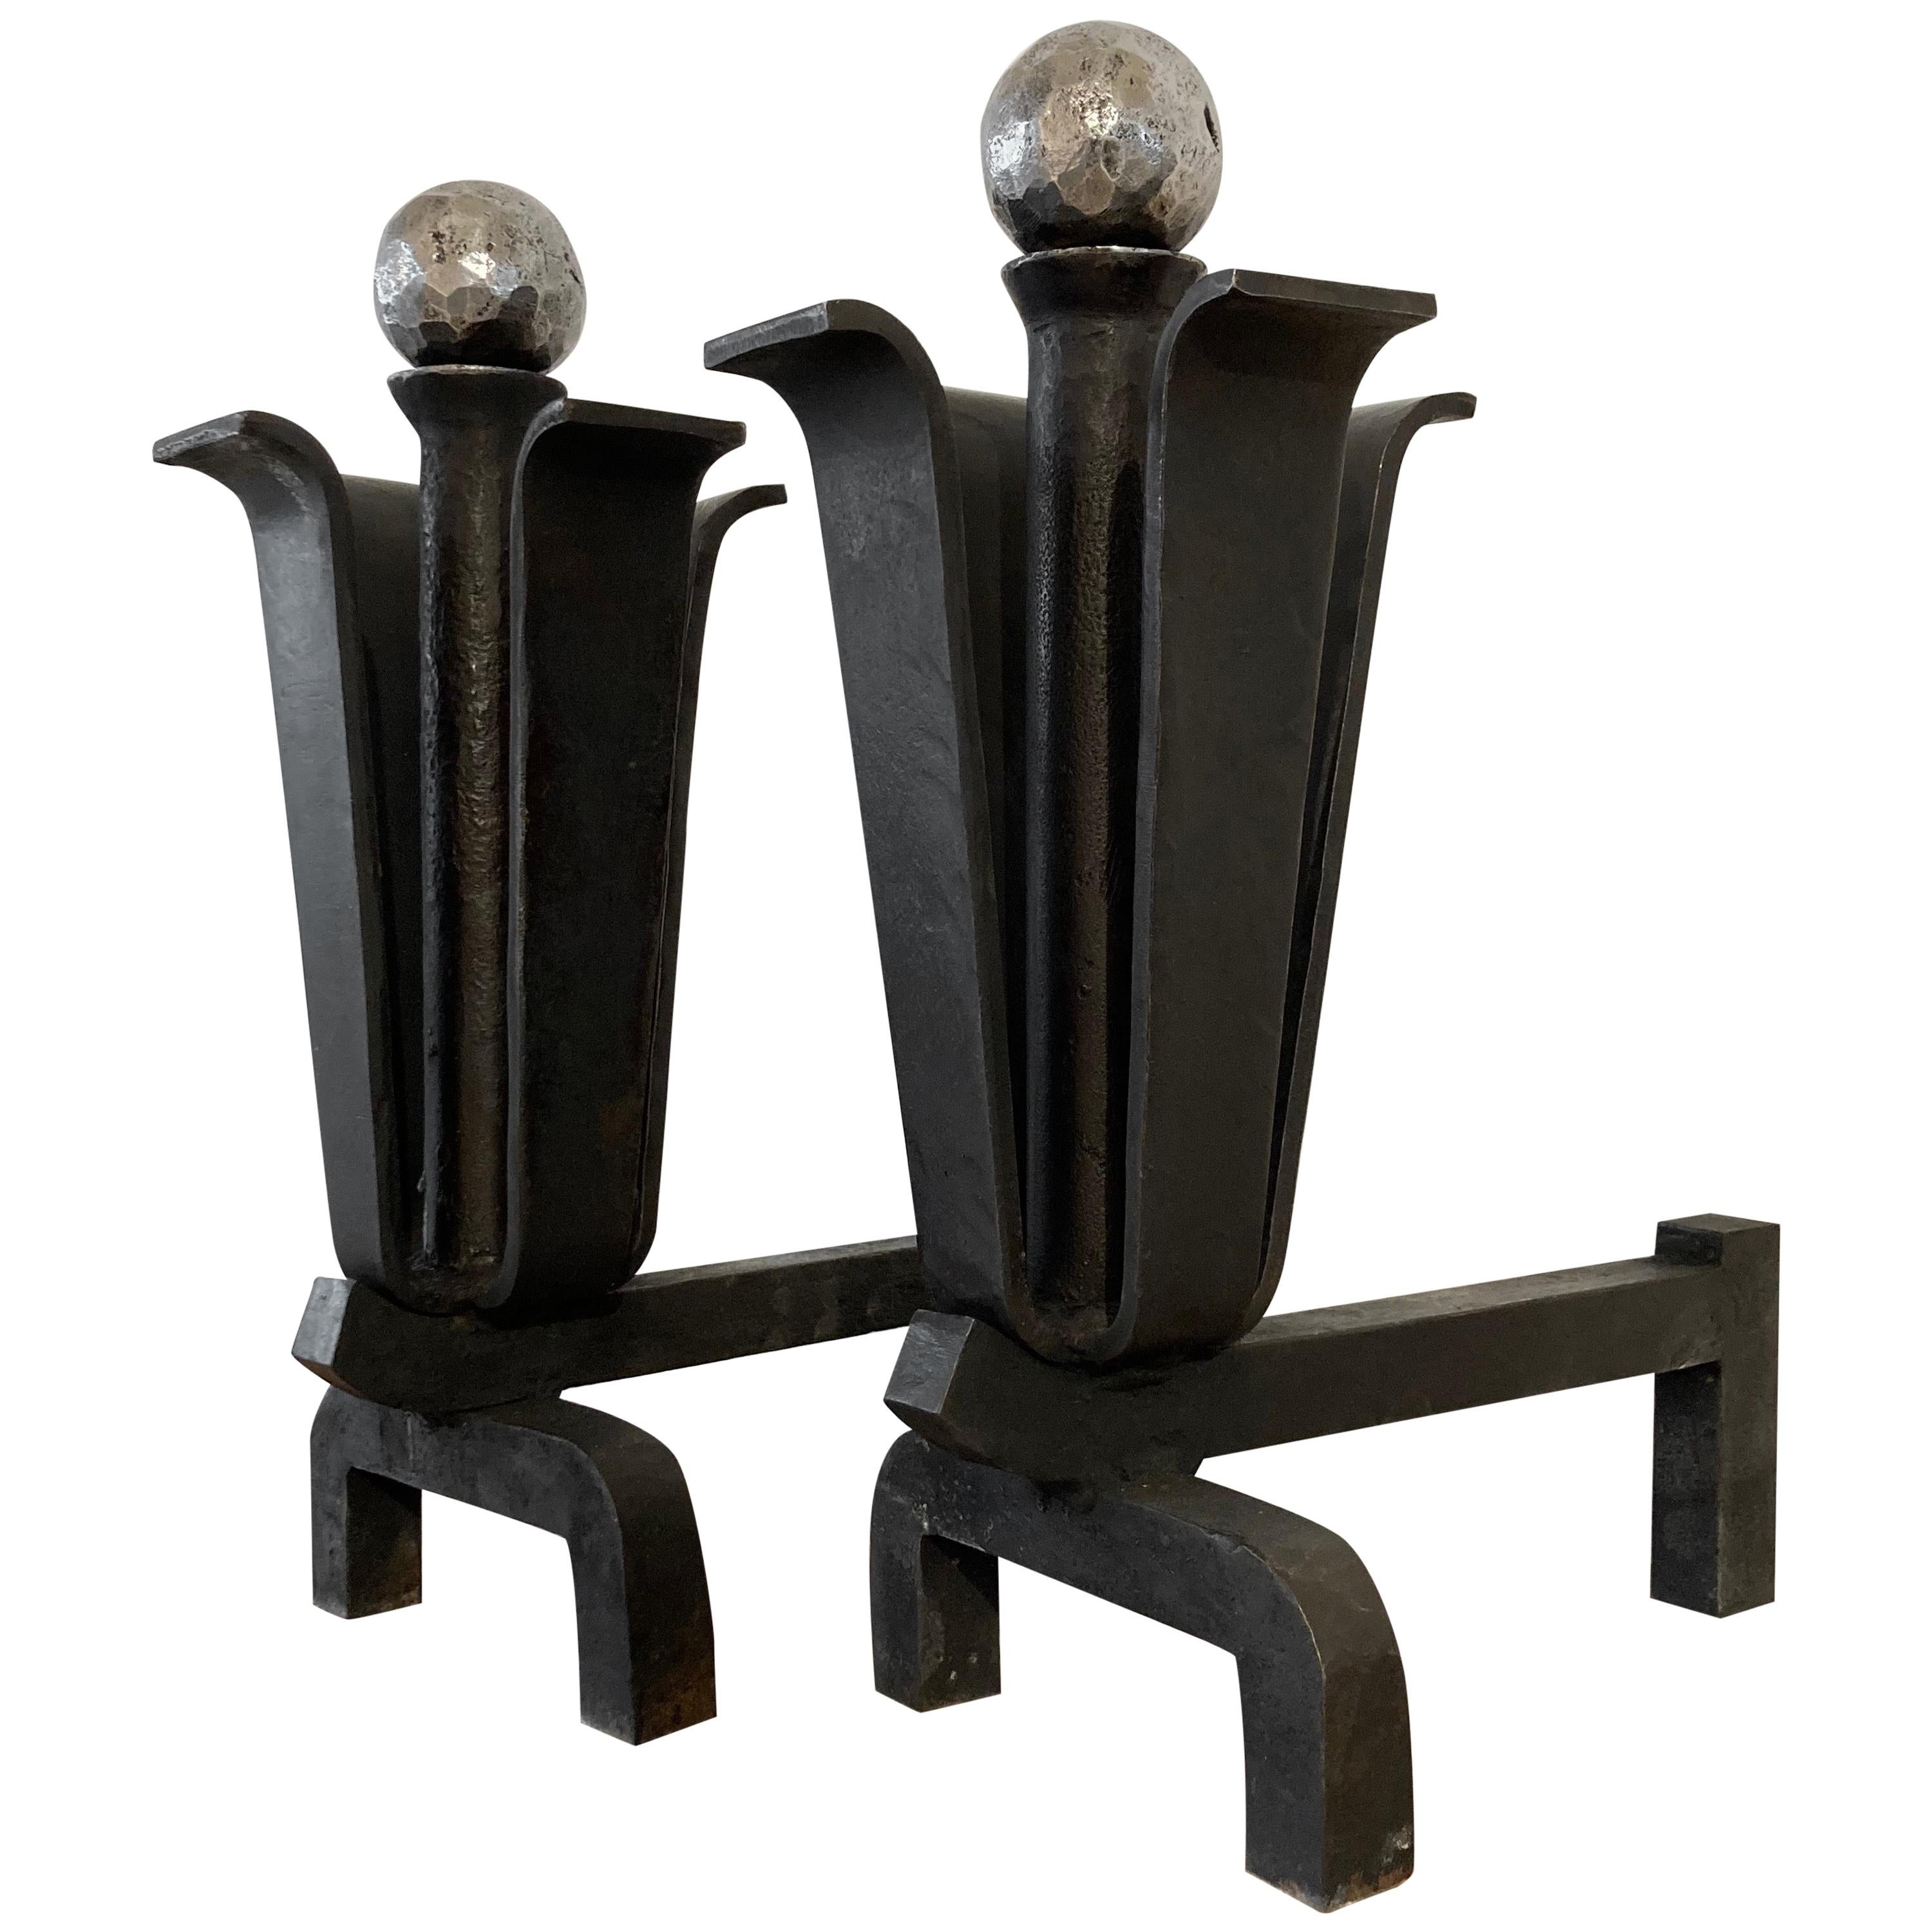 Stylish Pair of Mid-Century Modern Andirons or Firebogs For Sale